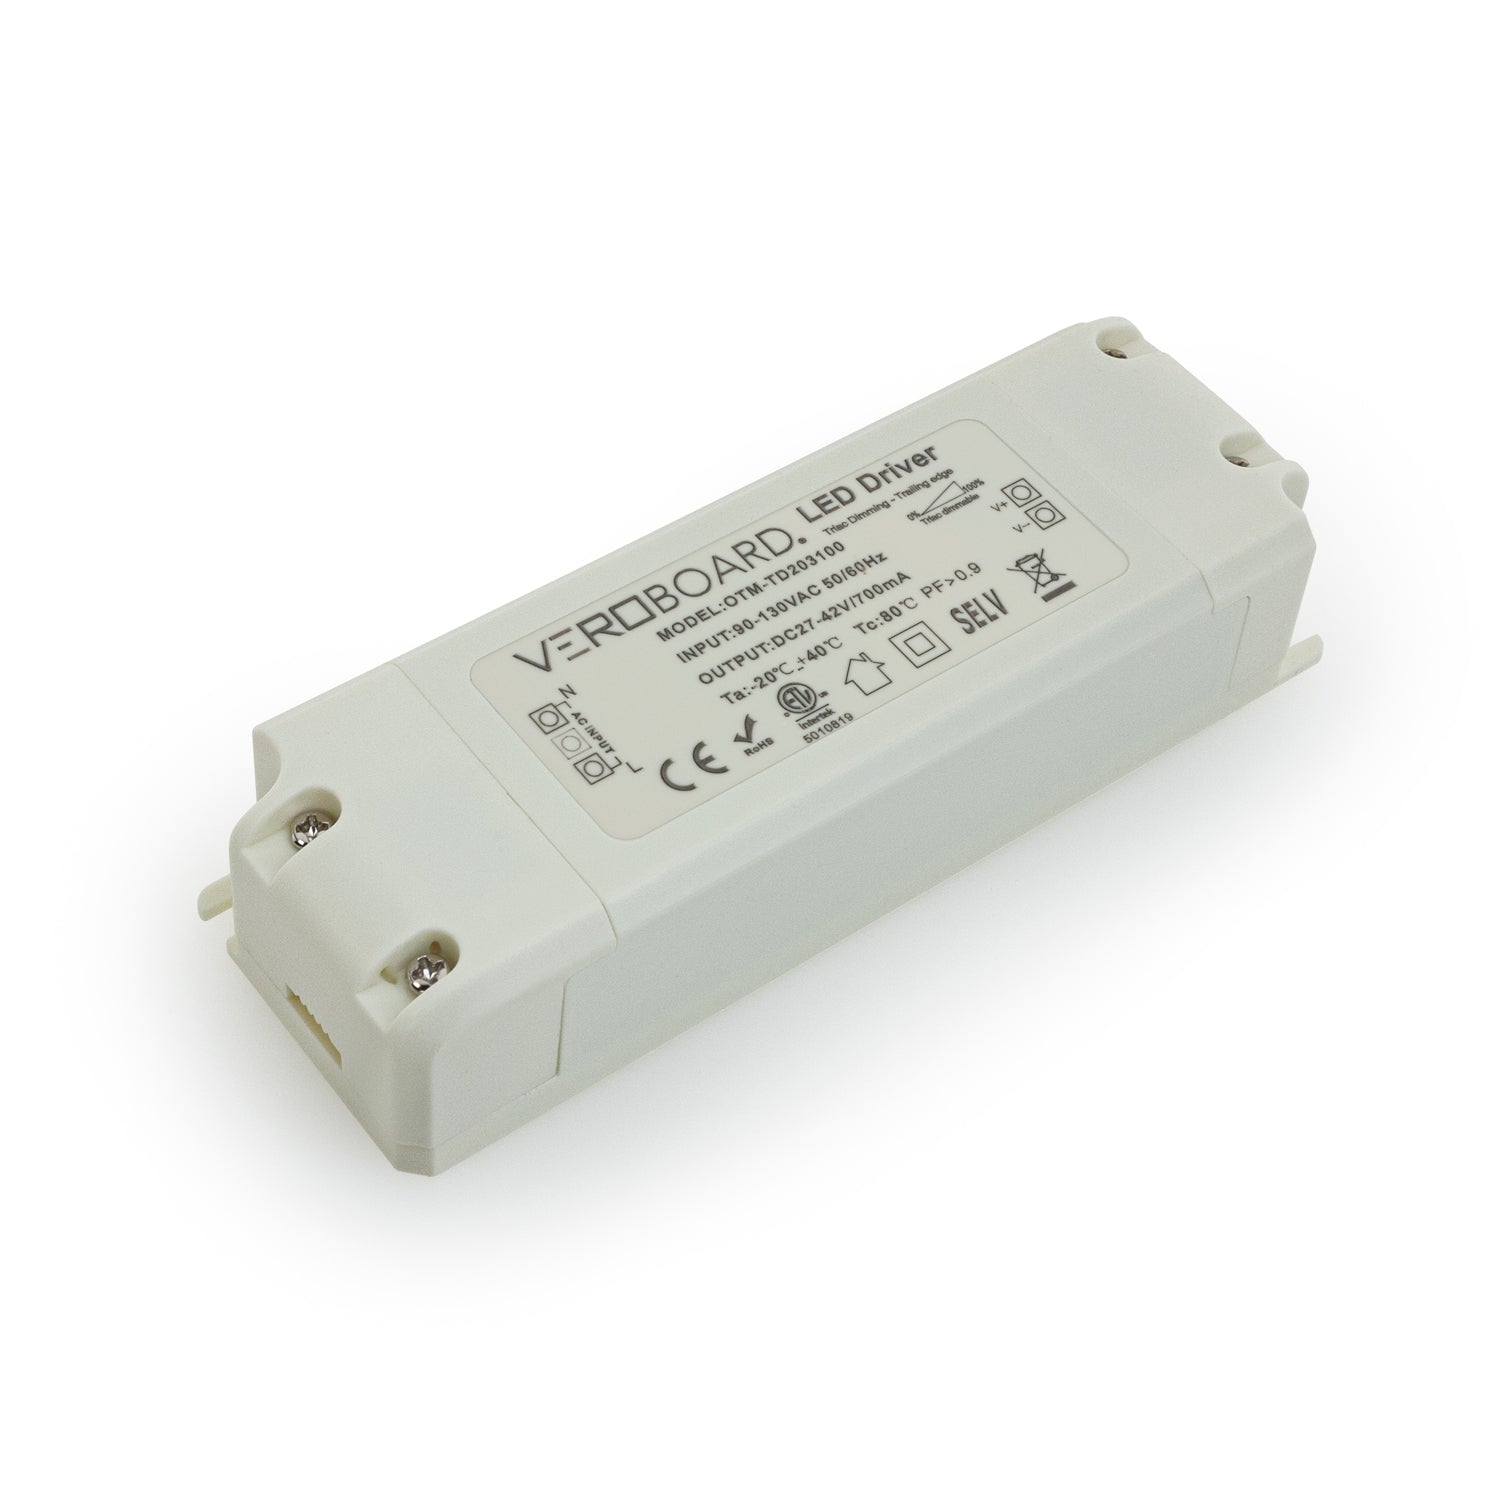 CCPSD series Constant Current LED Driver - DiodeDrive® - TRIAC Dimmable -  25W - 700mA - 25-35 VDC - CCPSD-25W-700T